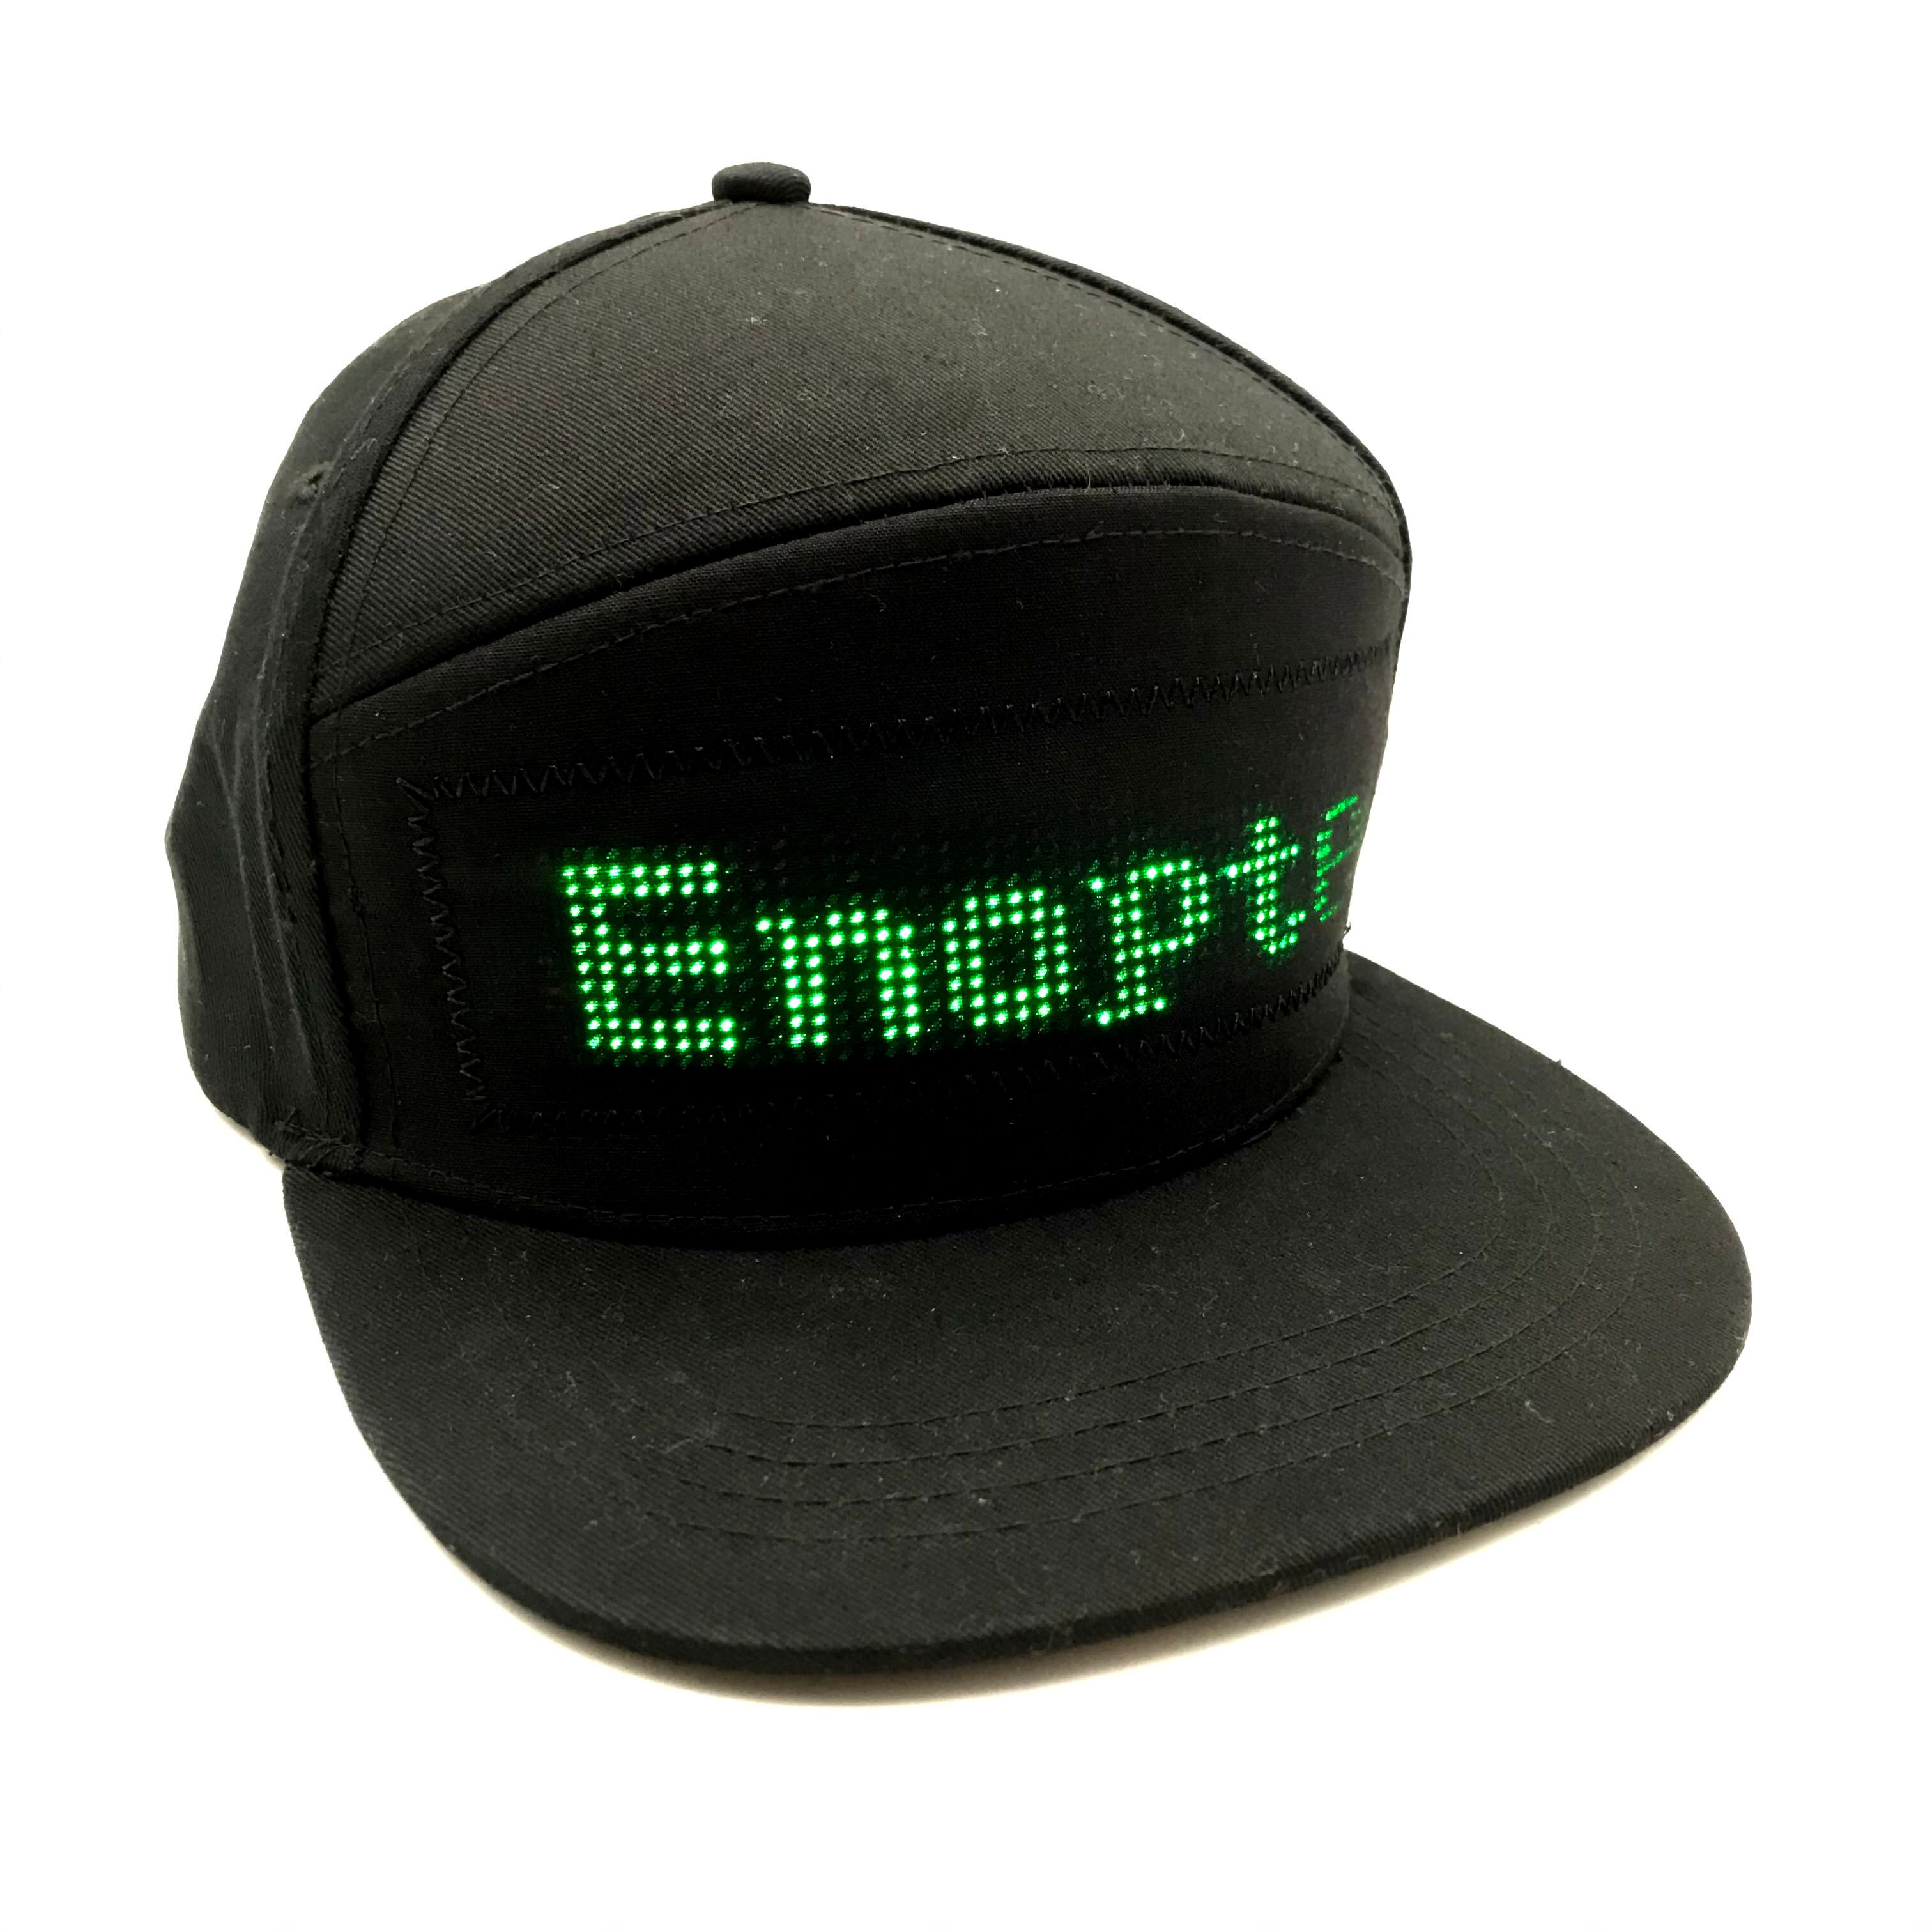 LED Cap, LED Display Screen Smart Hat Bluetooth Adjustable Cool Hat for Party Club: Green